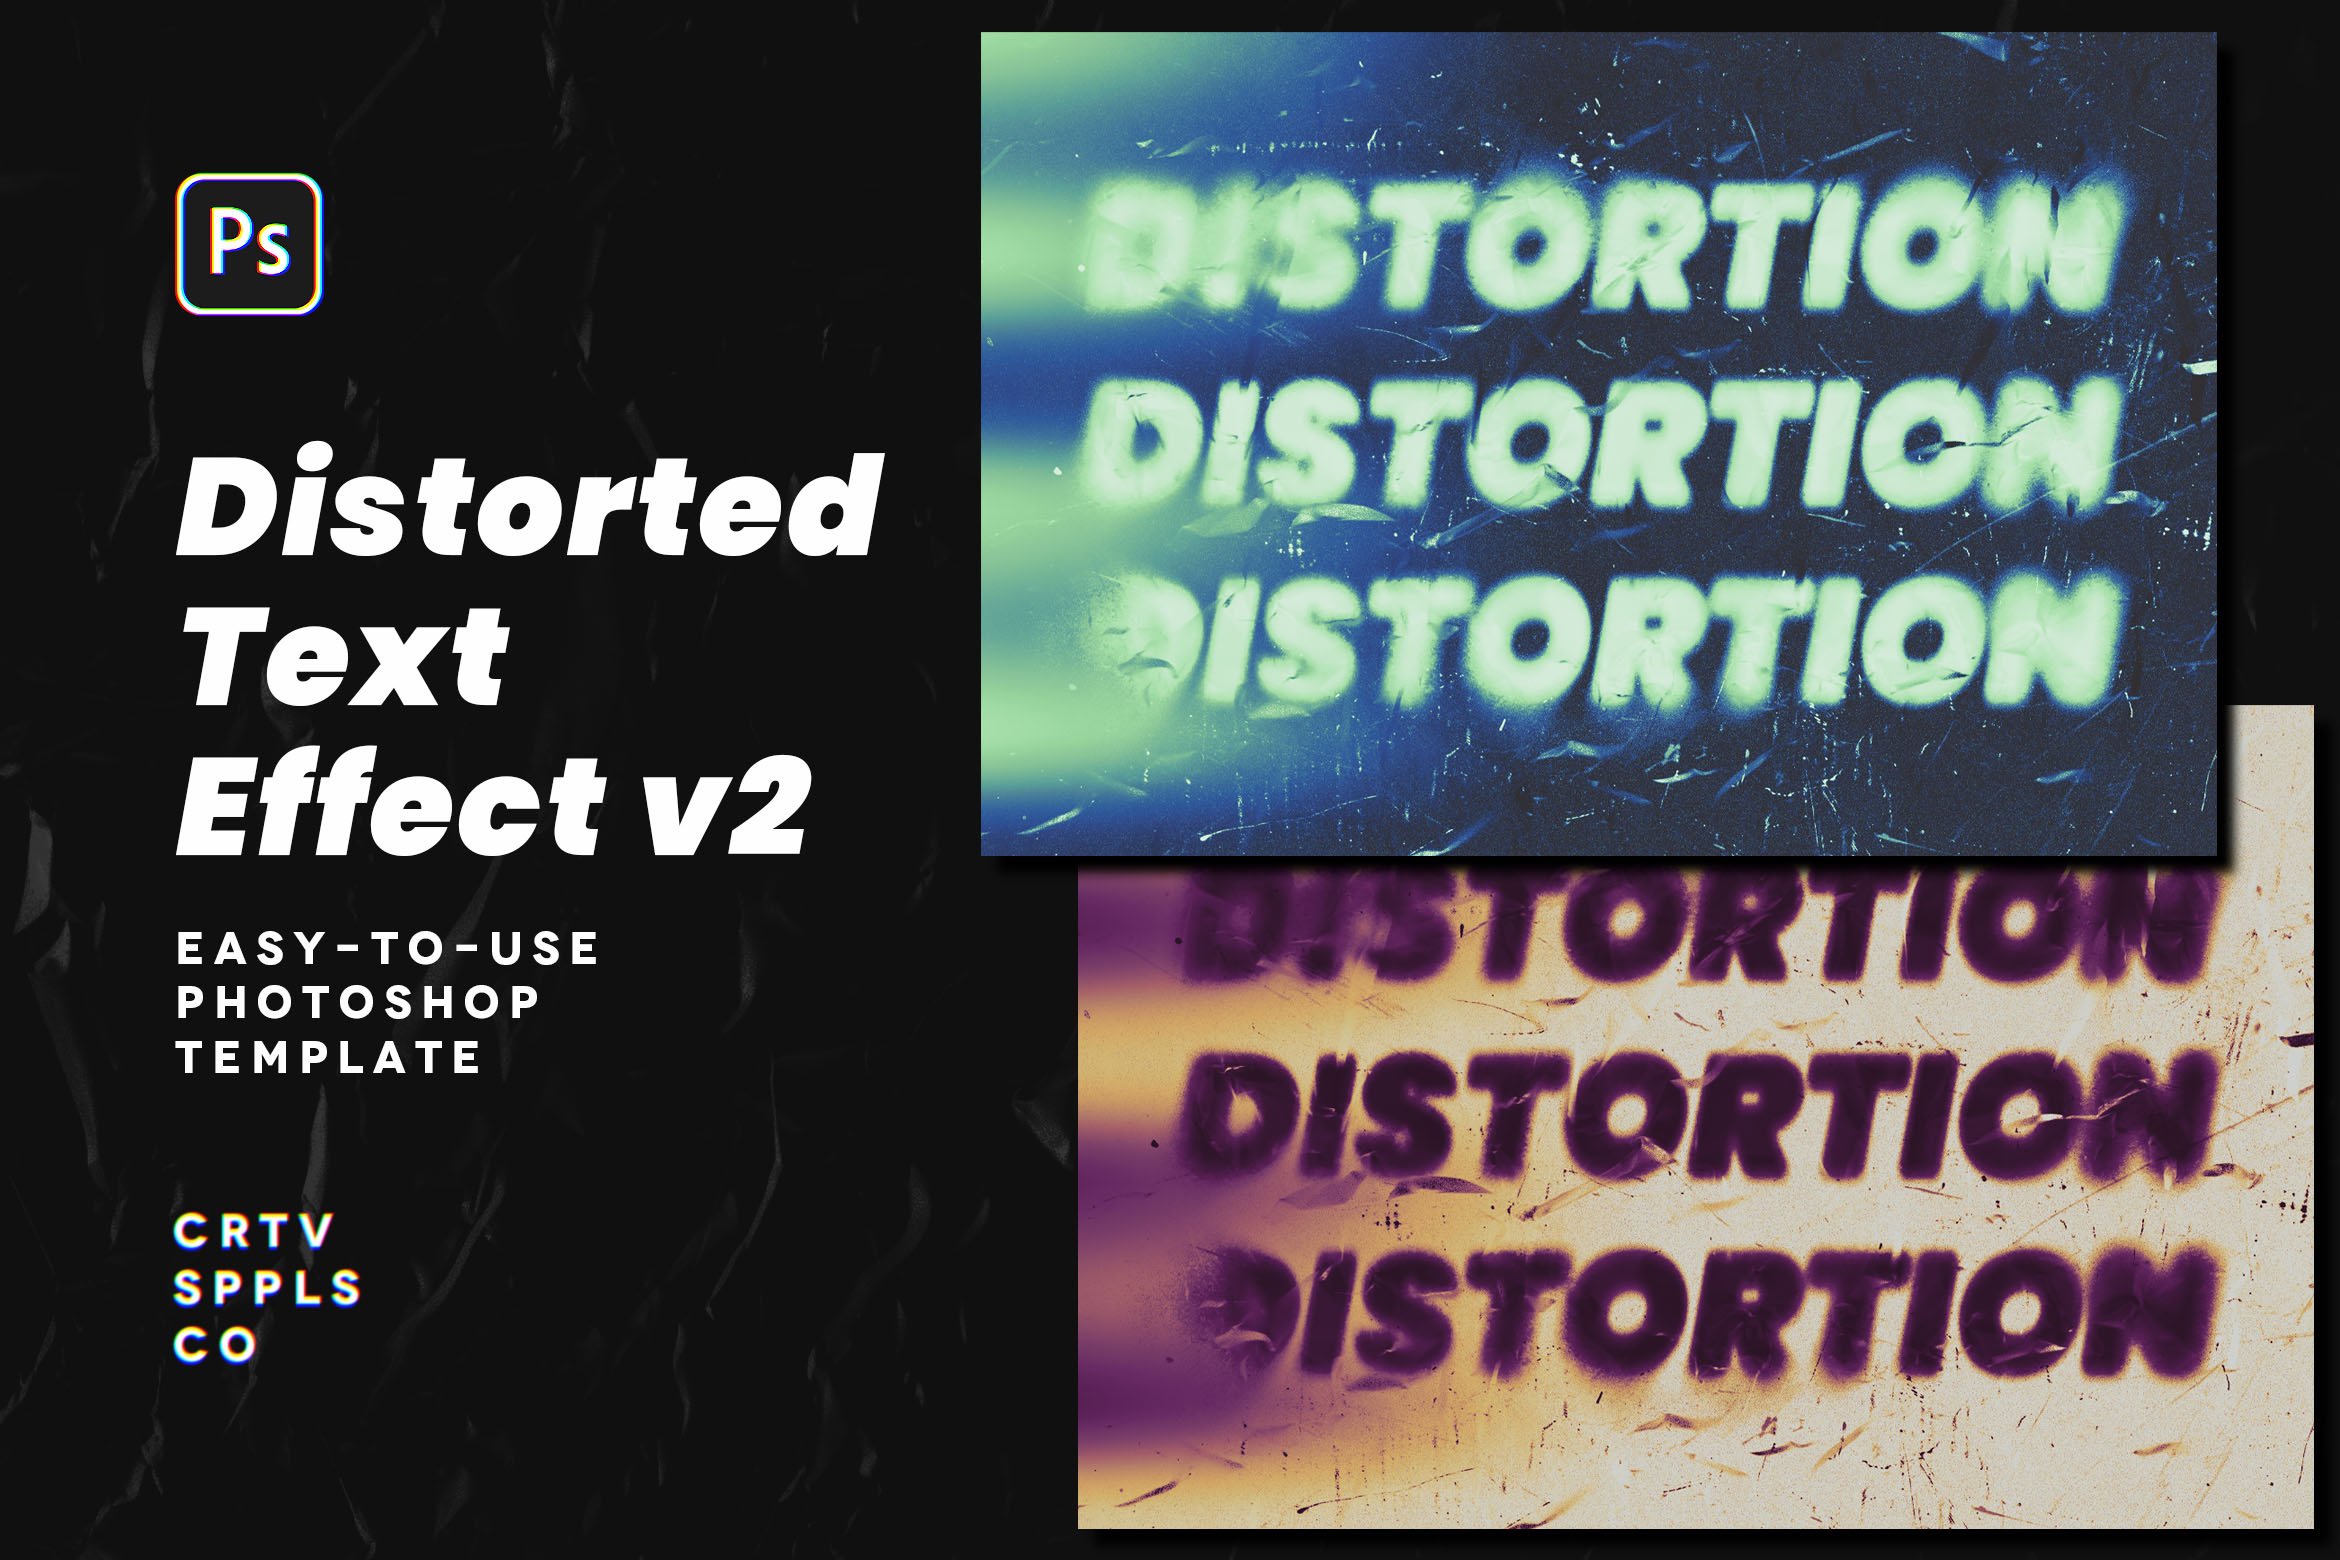 Distorted Text Effect Vol. 02cover image.